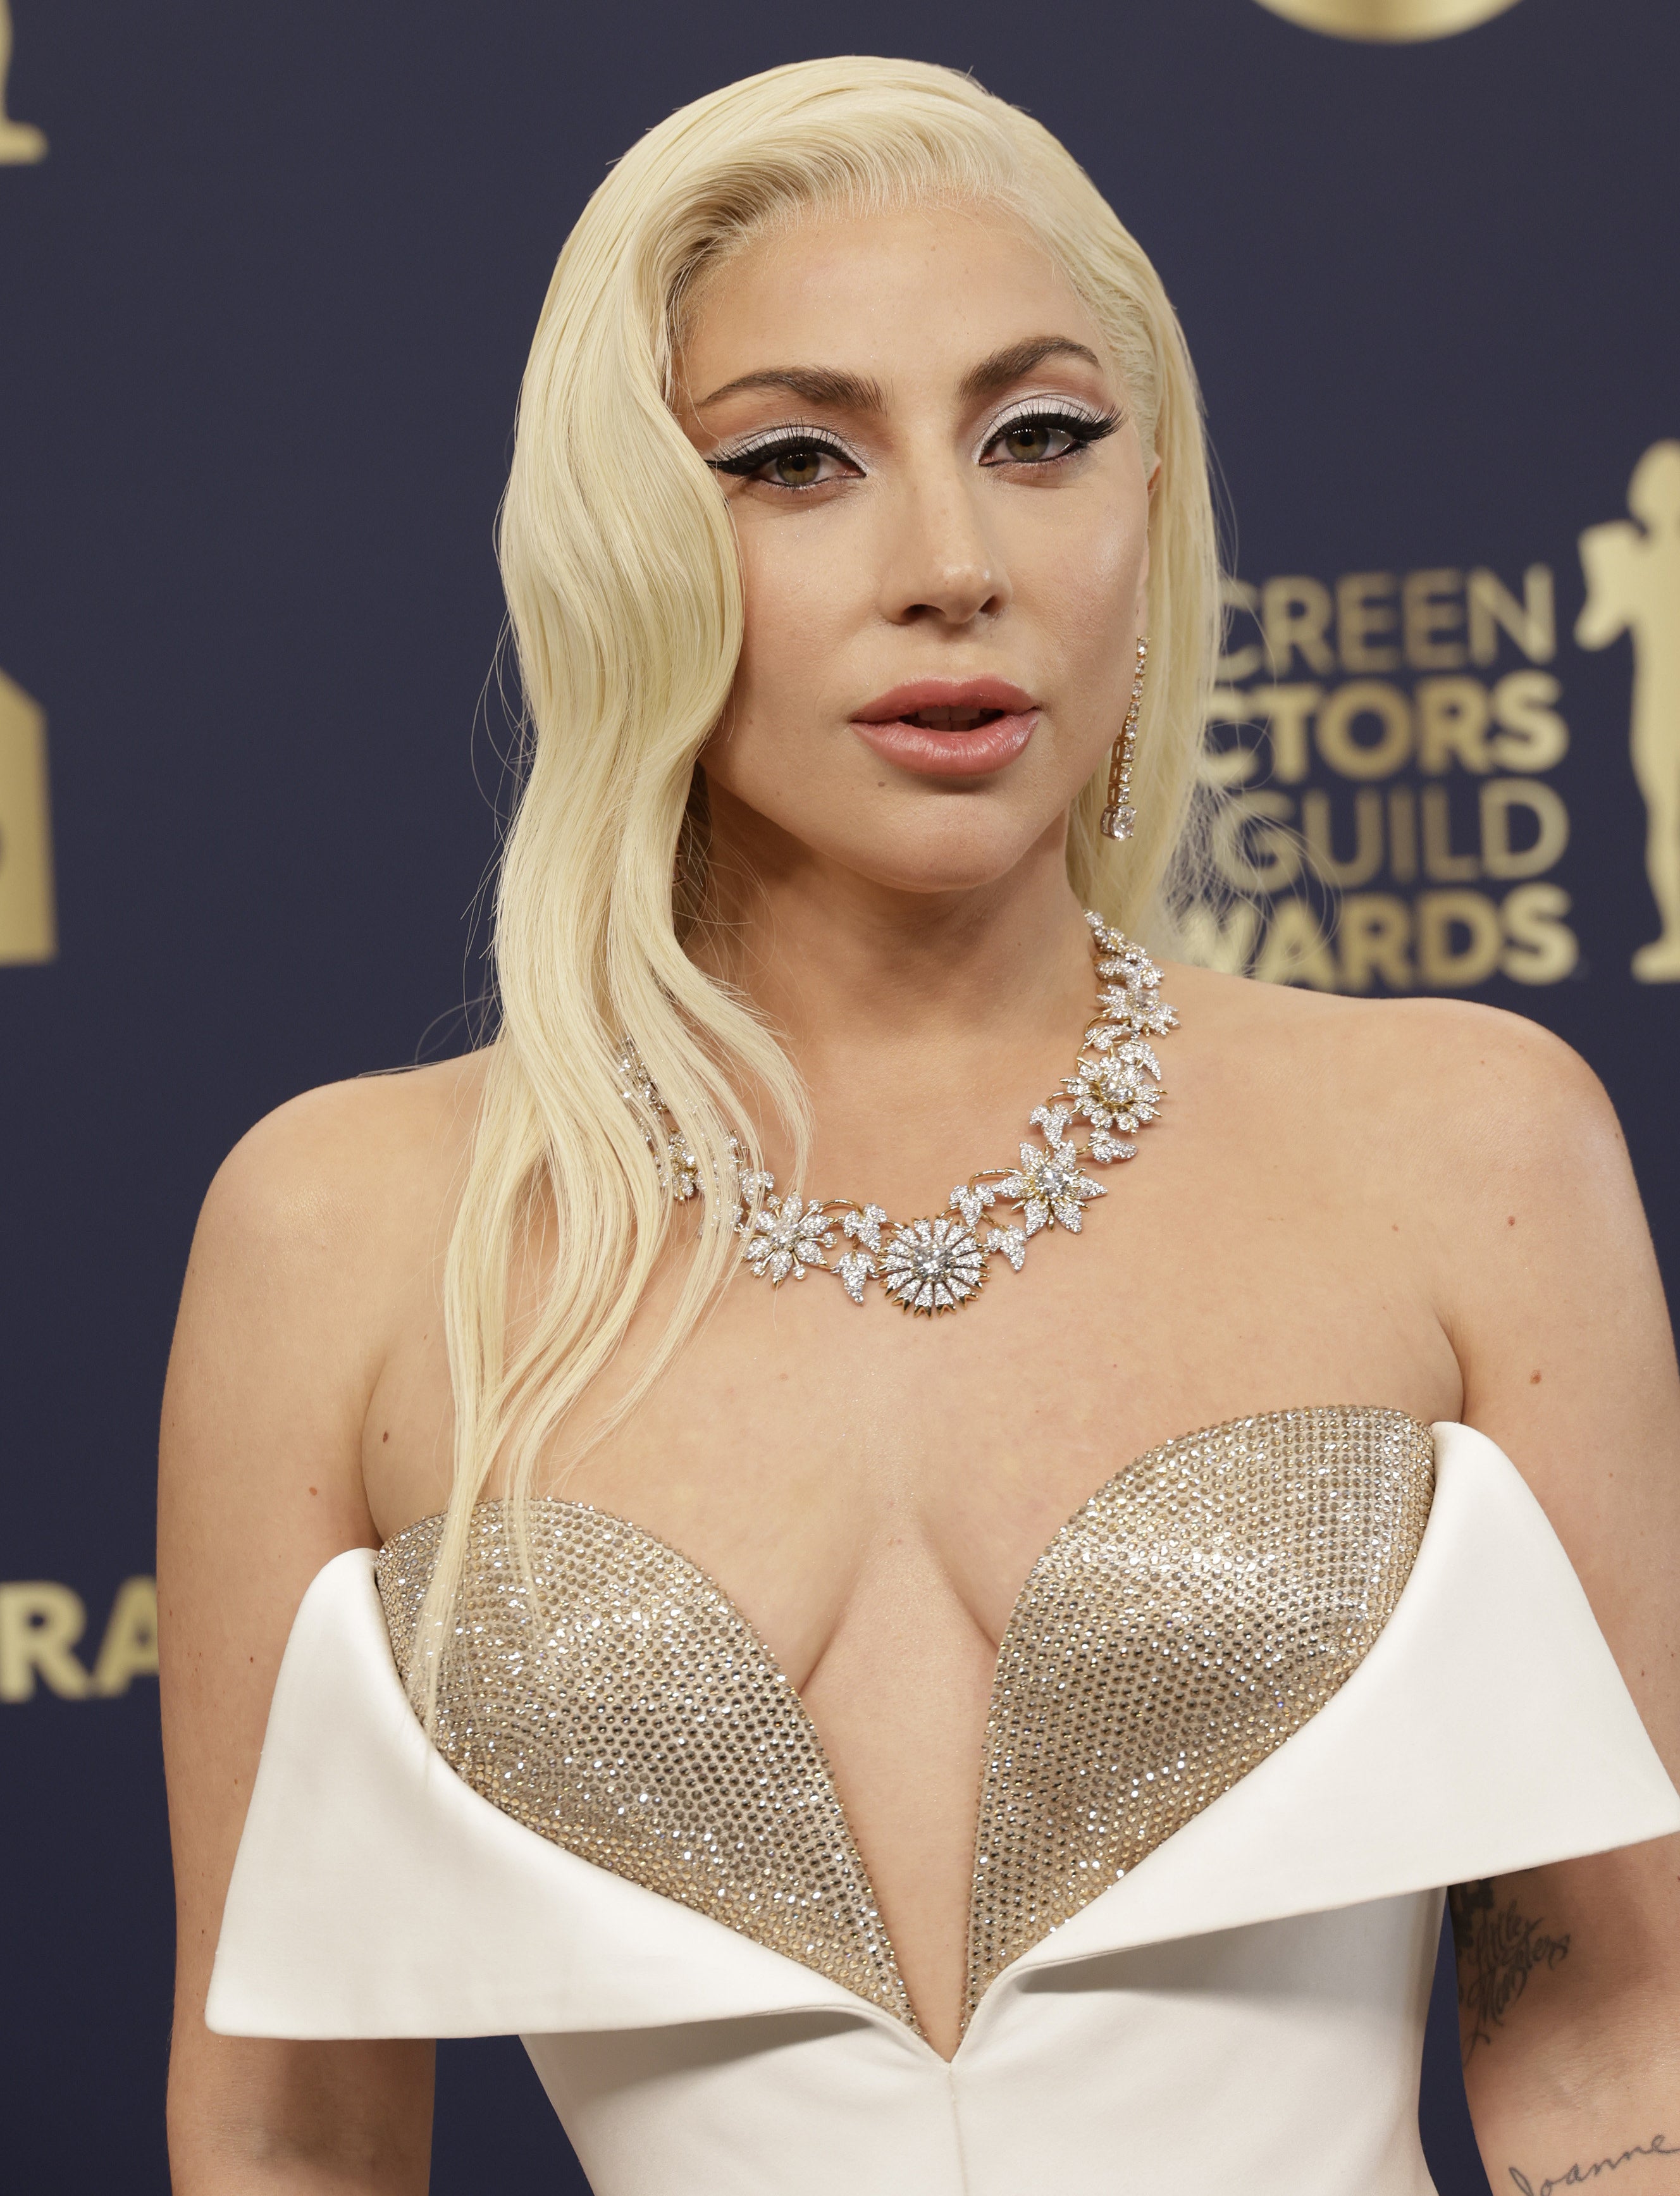 Lady Gaga arrives at the Screen Actors Guild Awards in 2022